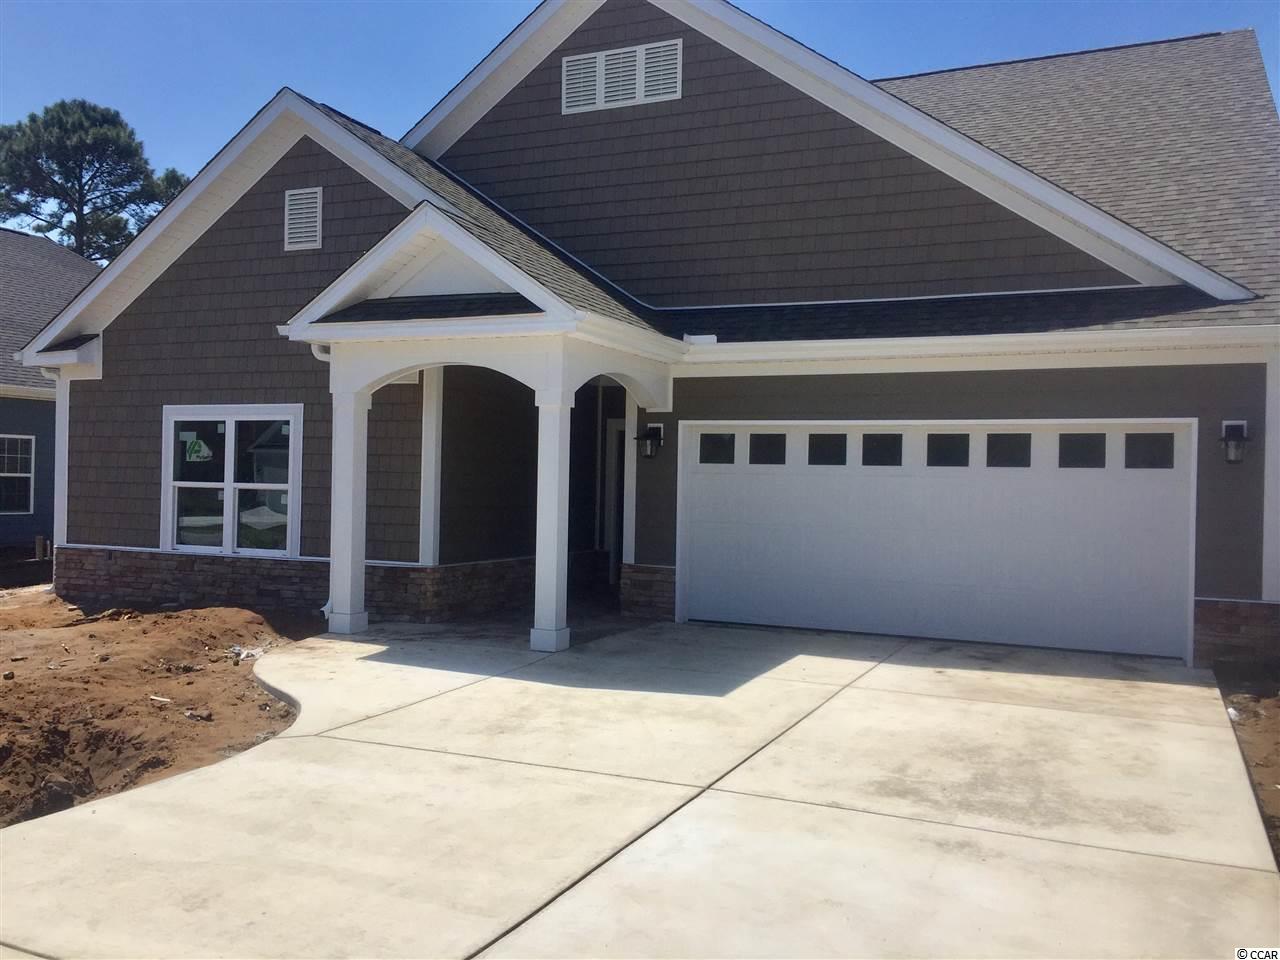 173 Swallow Tail Ct. Little River, SC 29566